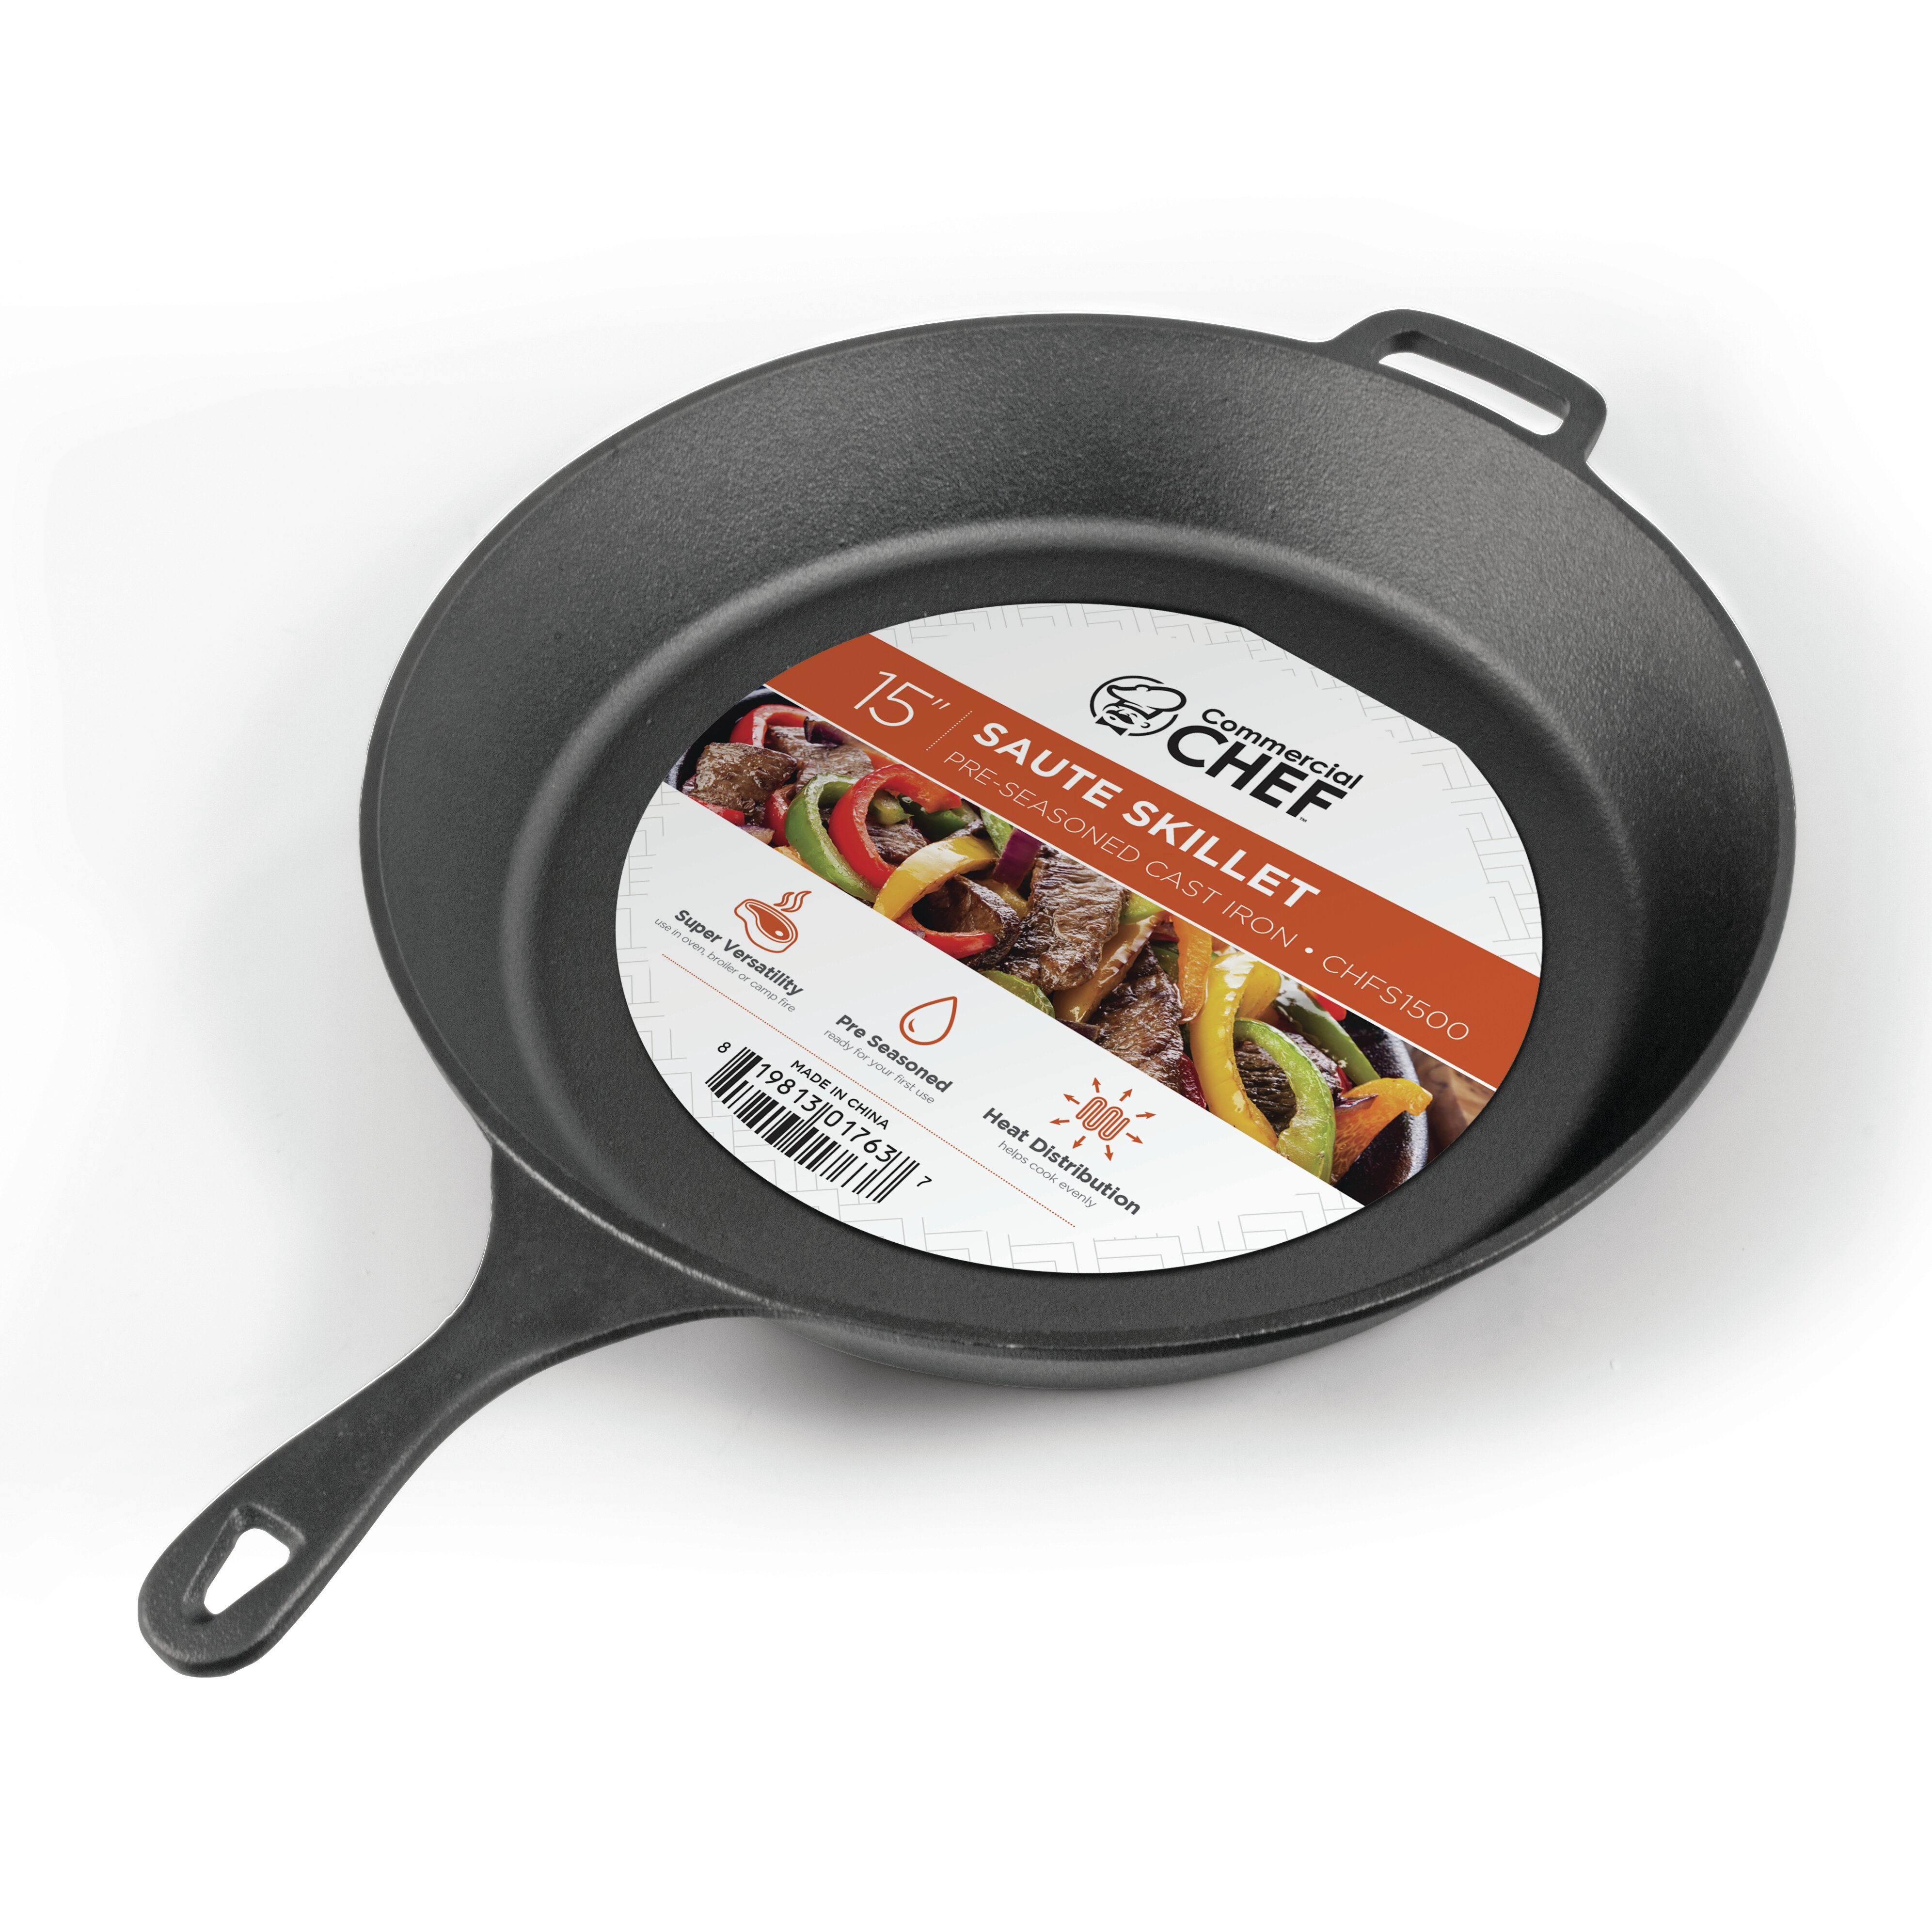 15 Inch Cast Iron Skillet Frying Oven With Handle Cooking Pre-Seasoned  Cookware